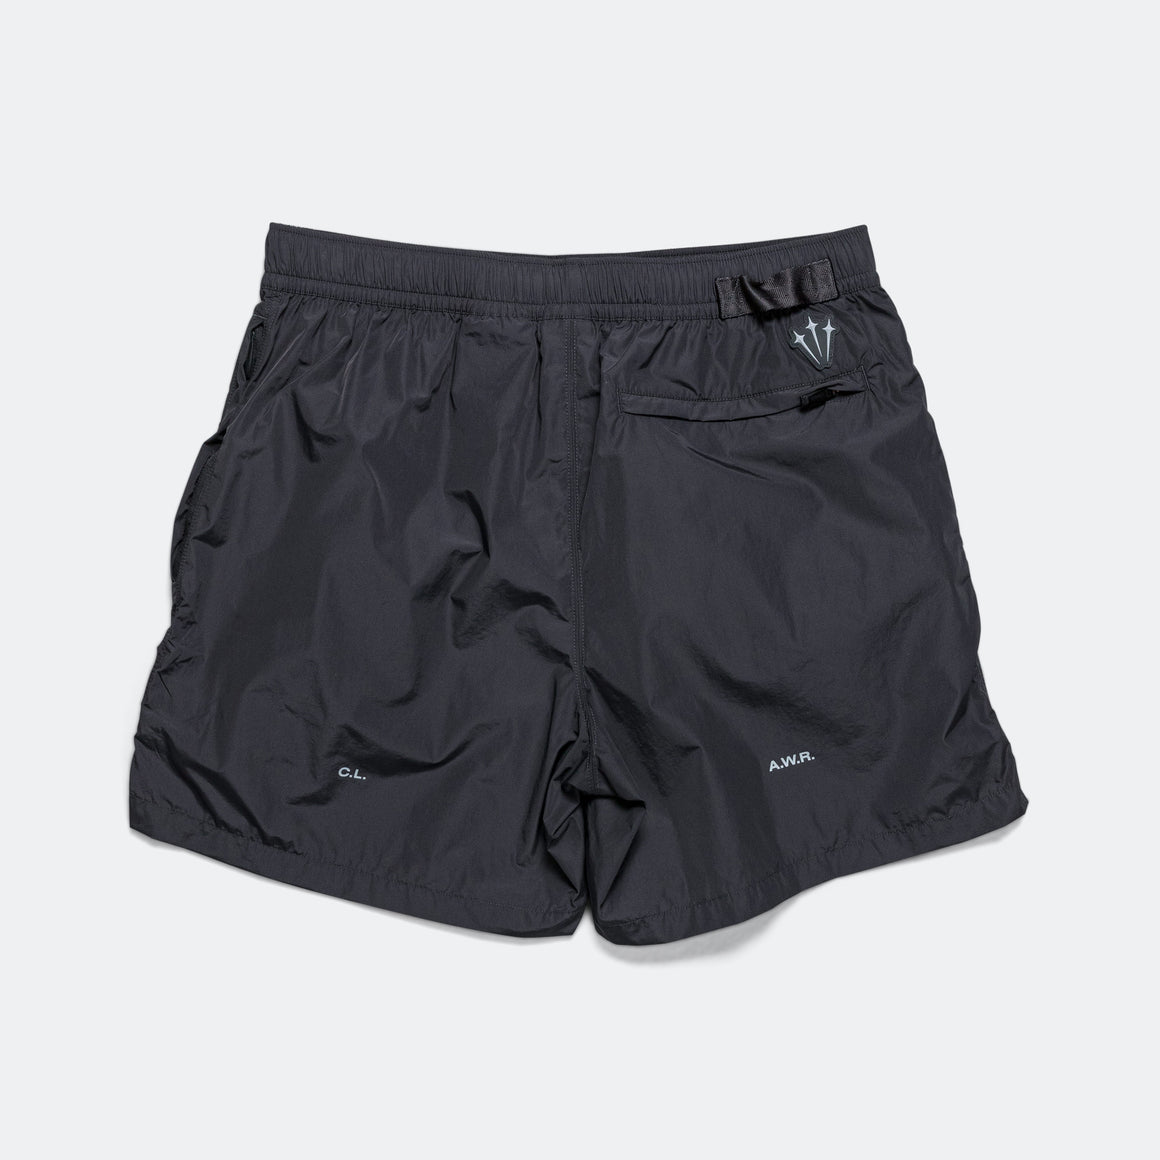 Nike - NOCTA CS Woven Short - Anthracite/Wolf Grey - UP THERE